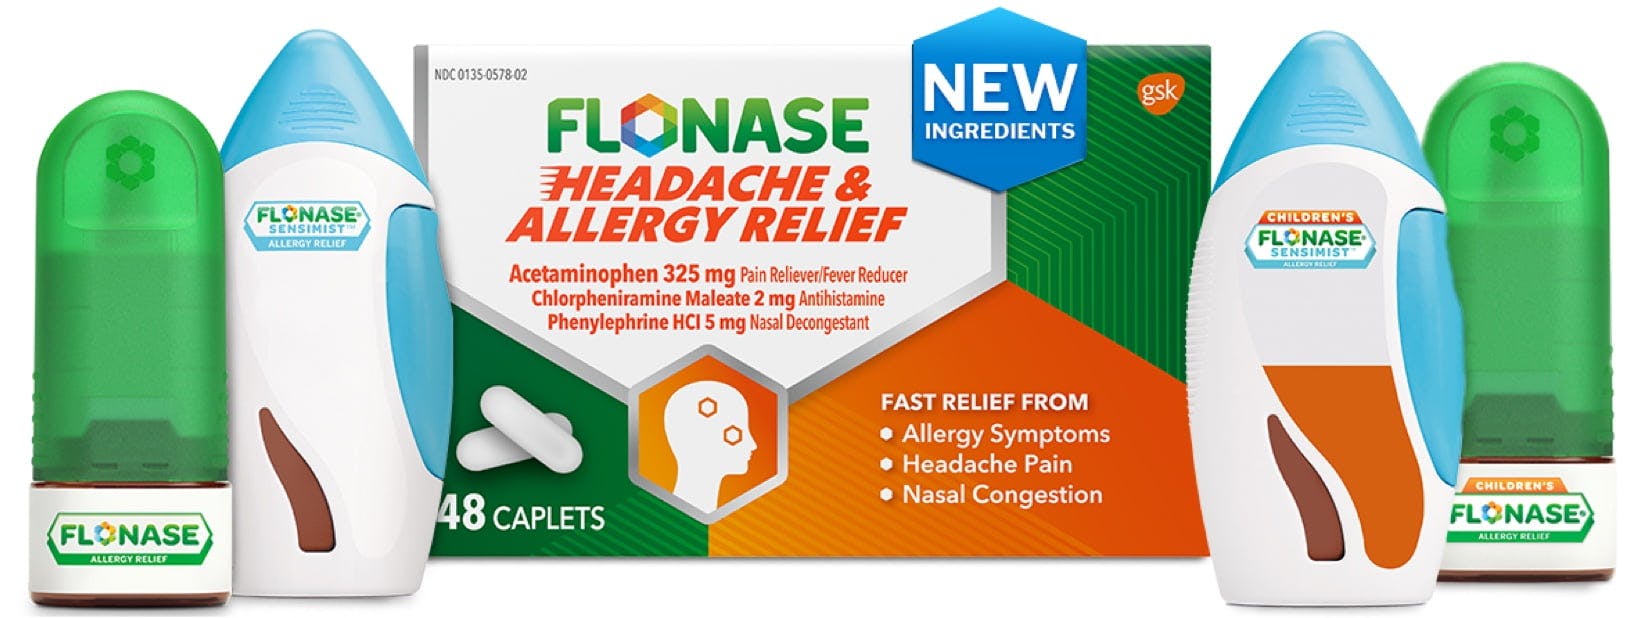 Flonase allergy relief products